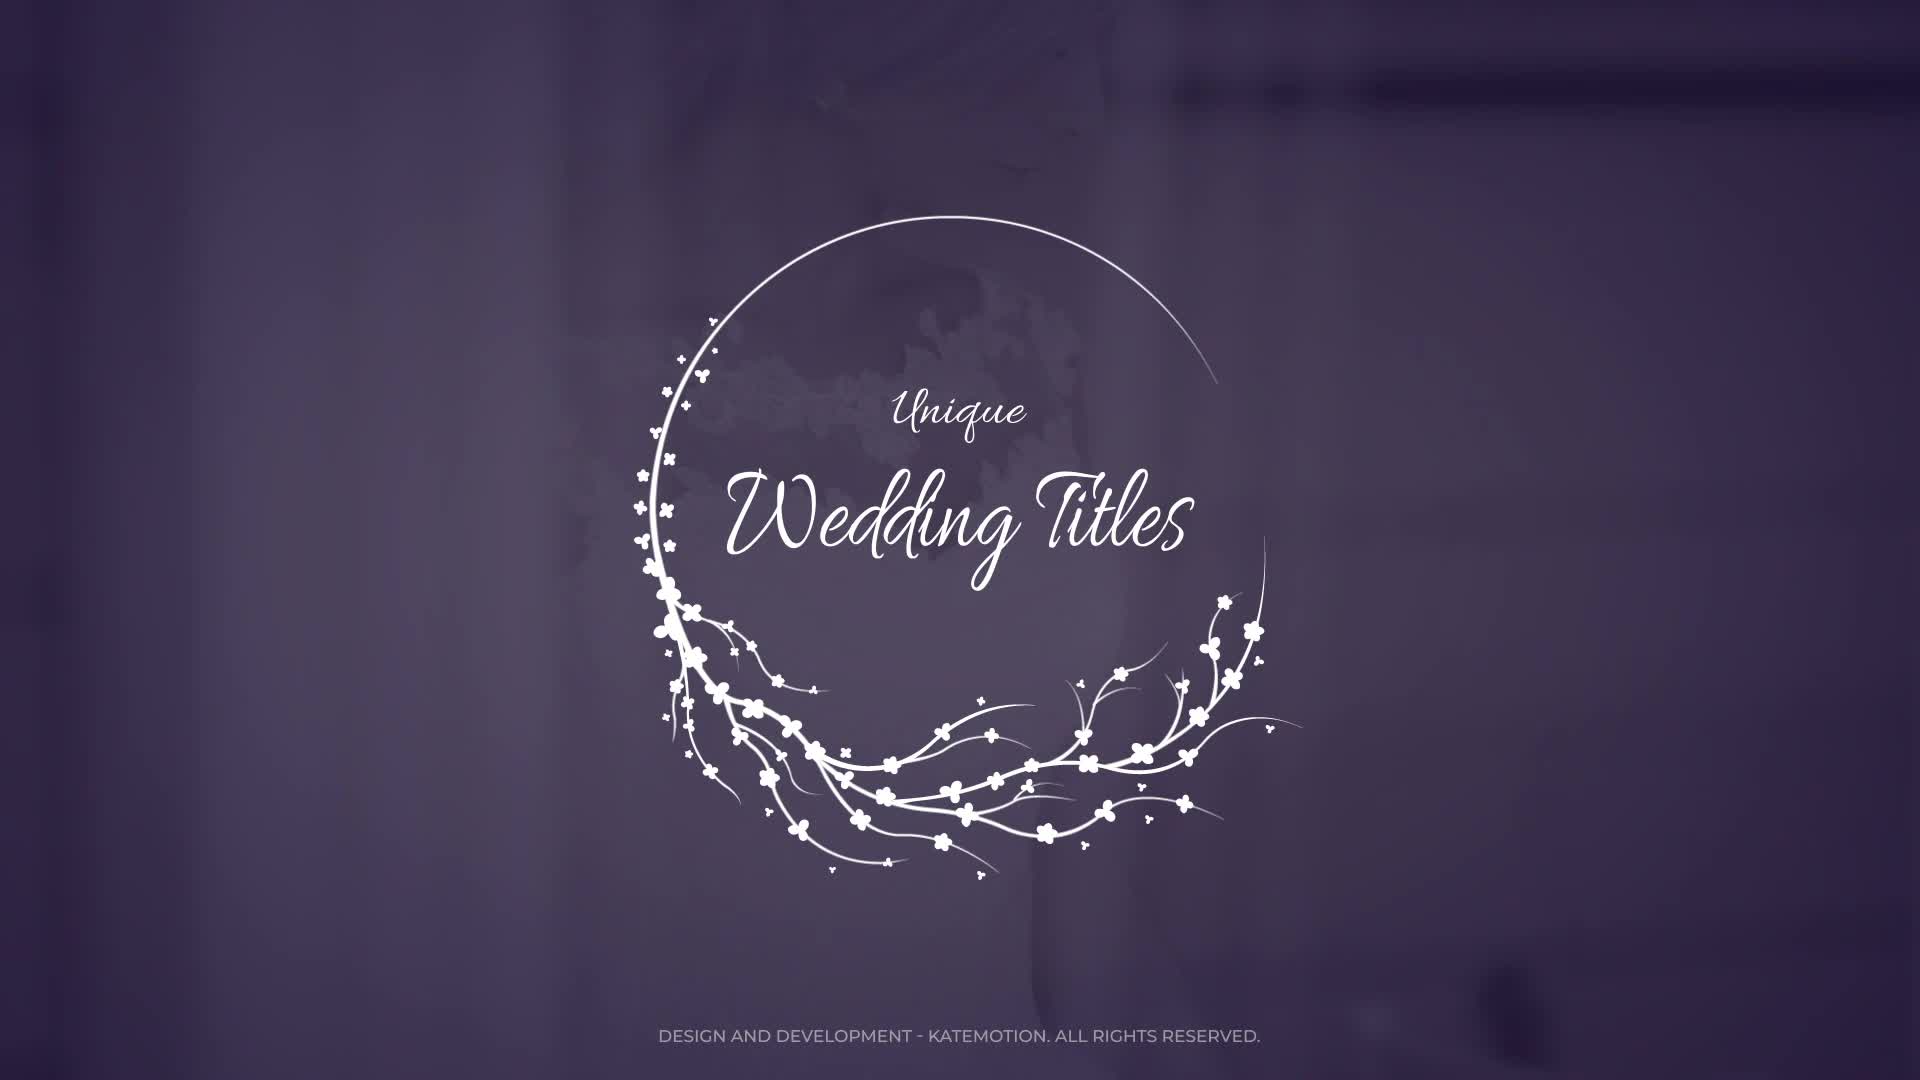 wedding titles vol 4 free download after effects project